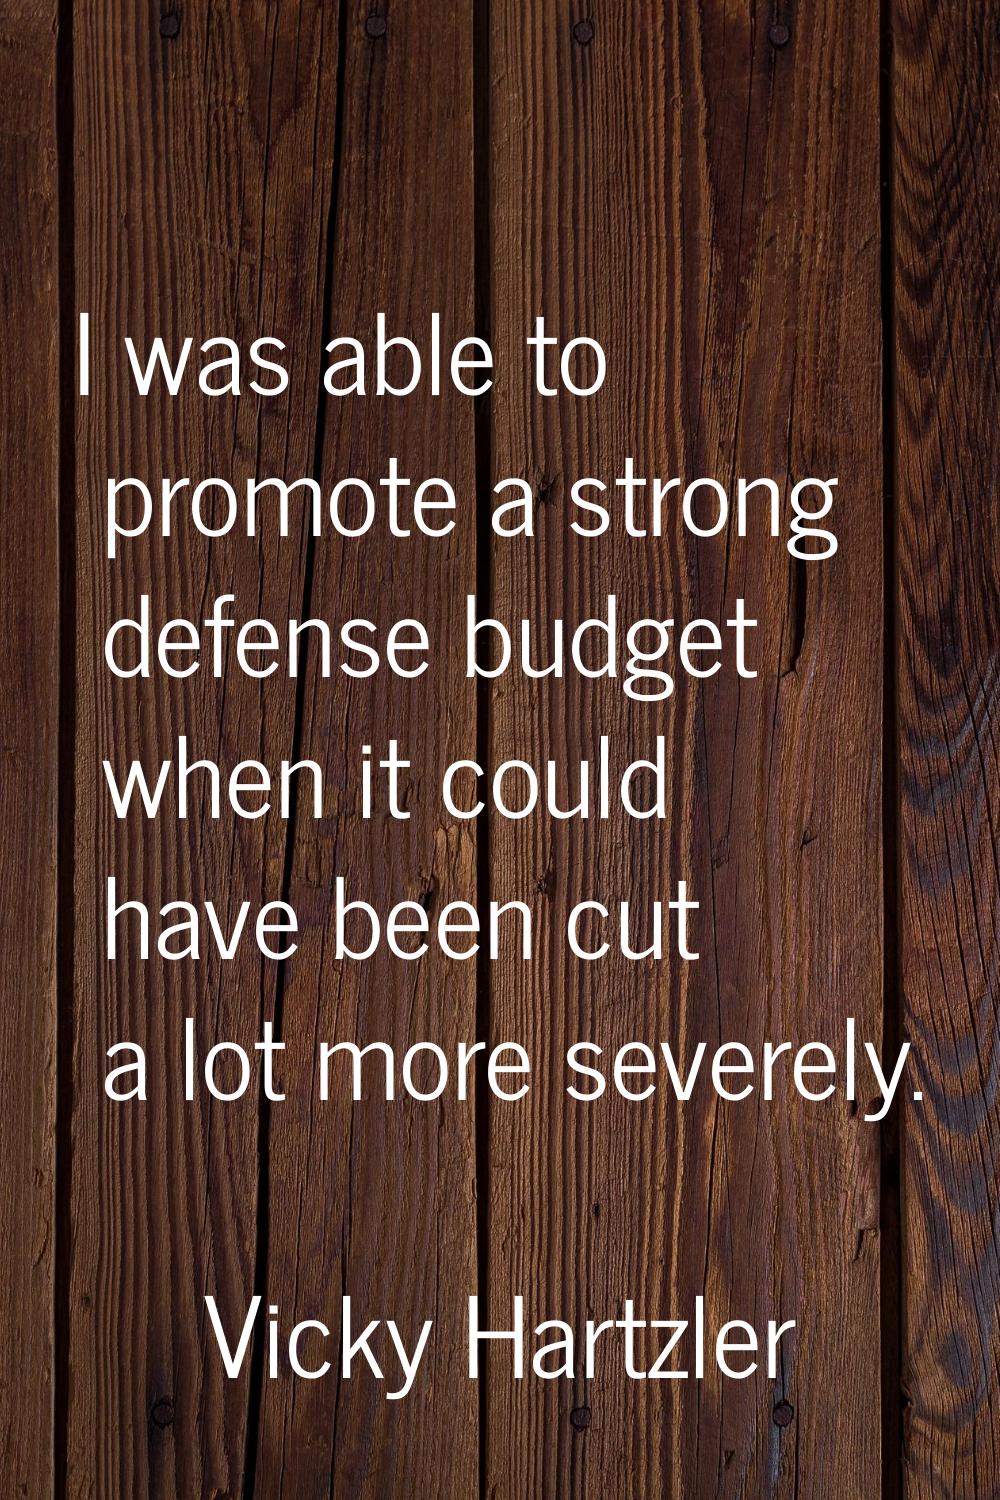 I was able to promote a strong defense budget when it could have been cut a lot more severely.